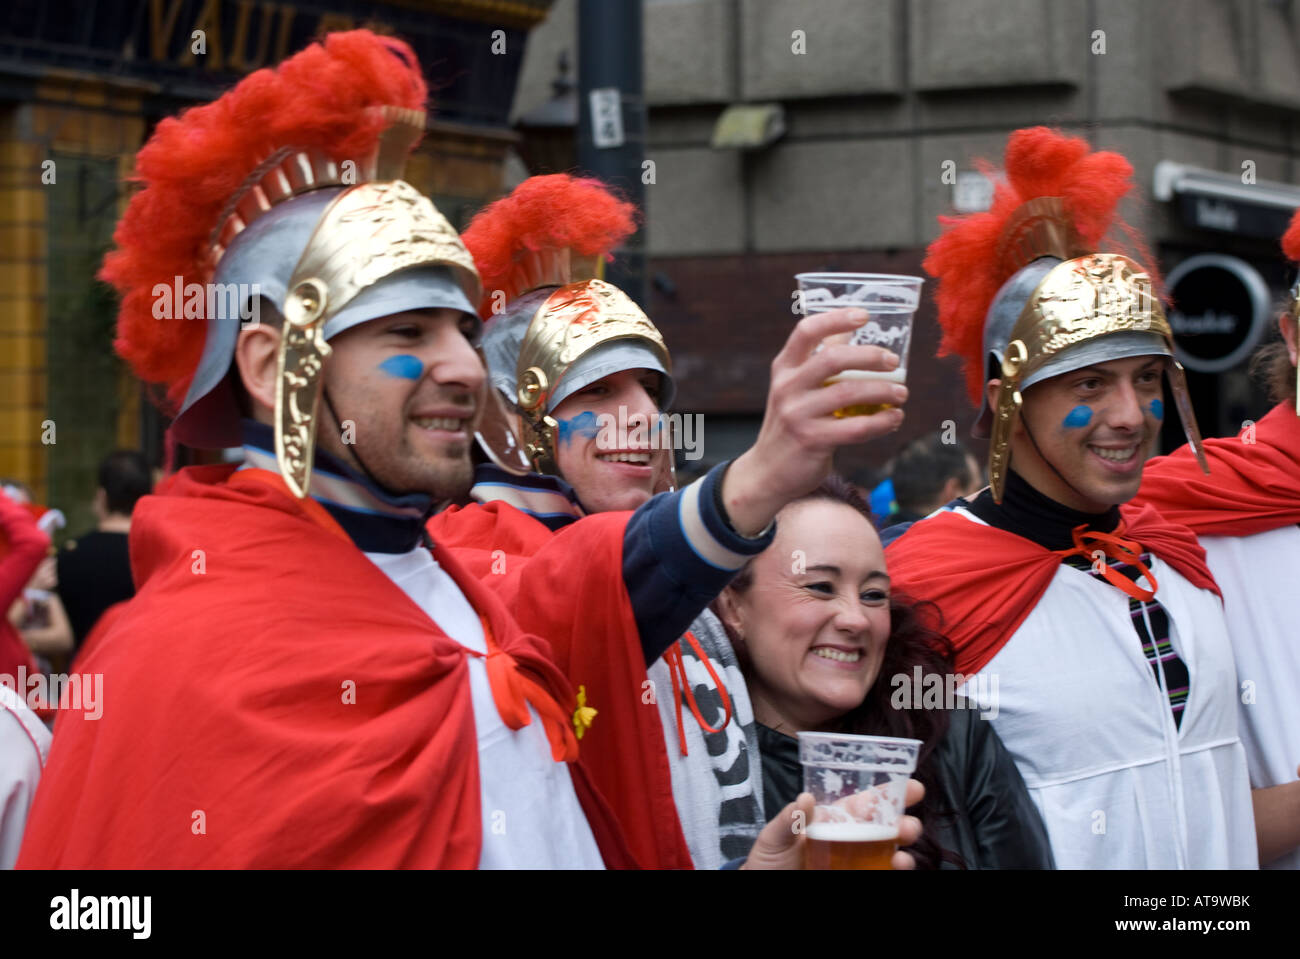 italian rugby fans as roman soldiers in cardiff for wales against italy in the 2008 grand slam win number 2649 Stock Photo